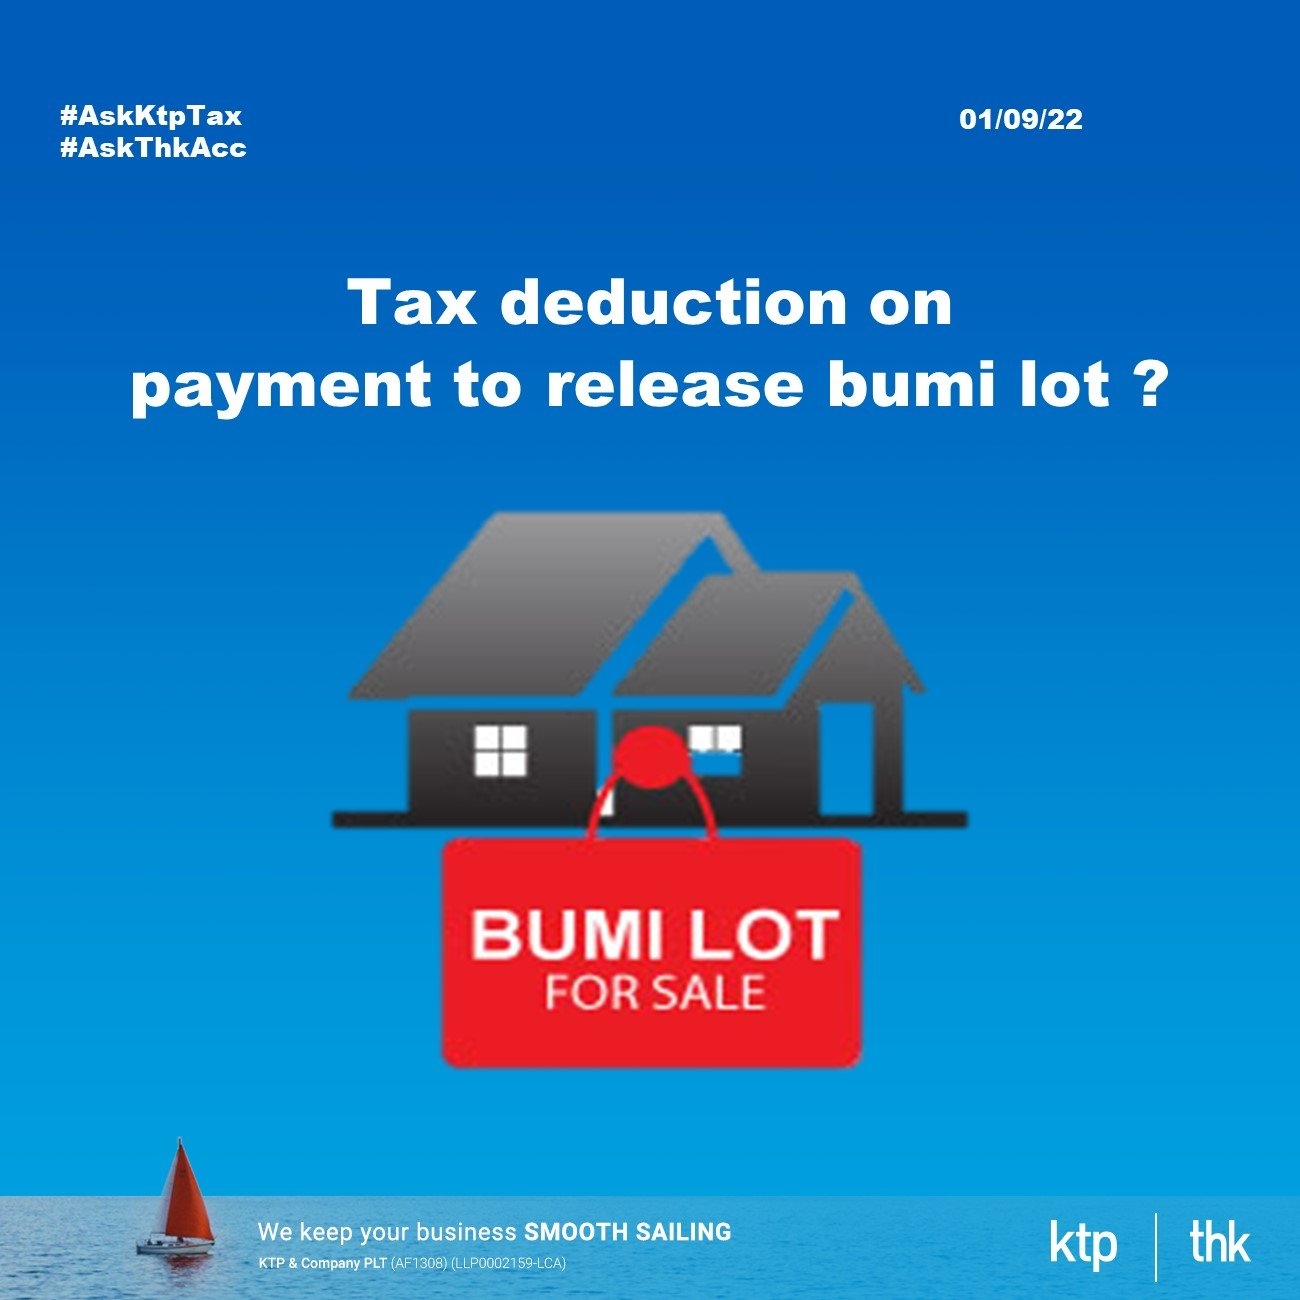 tax-deduction-on-payment-to-release-bumi-lot-sep-01-2022-johor